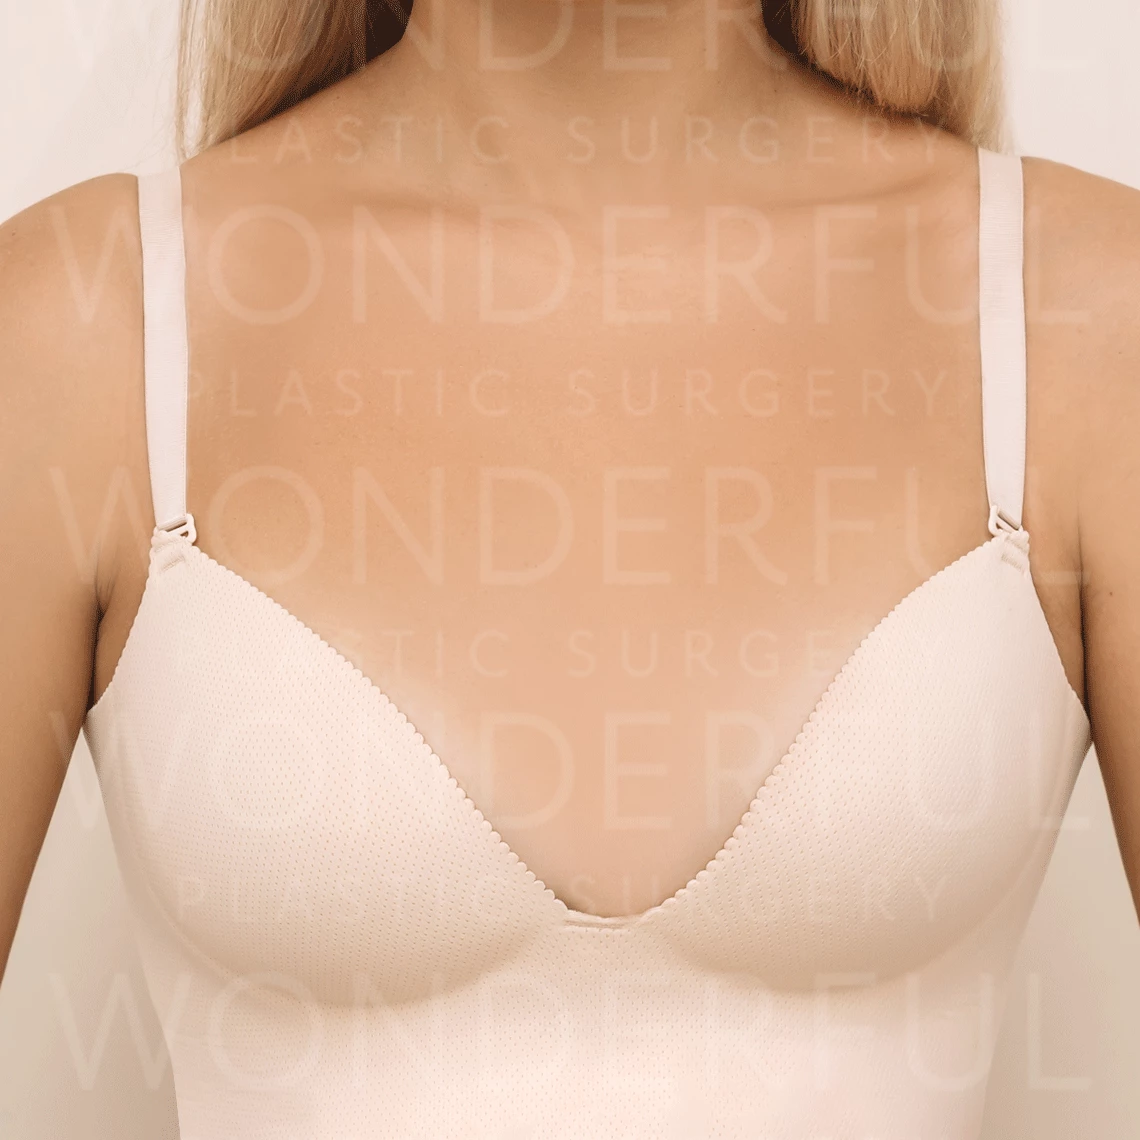 wonderful-plastic-surgery-hospital-korea-breast-augmentation-before-after-results-before-2